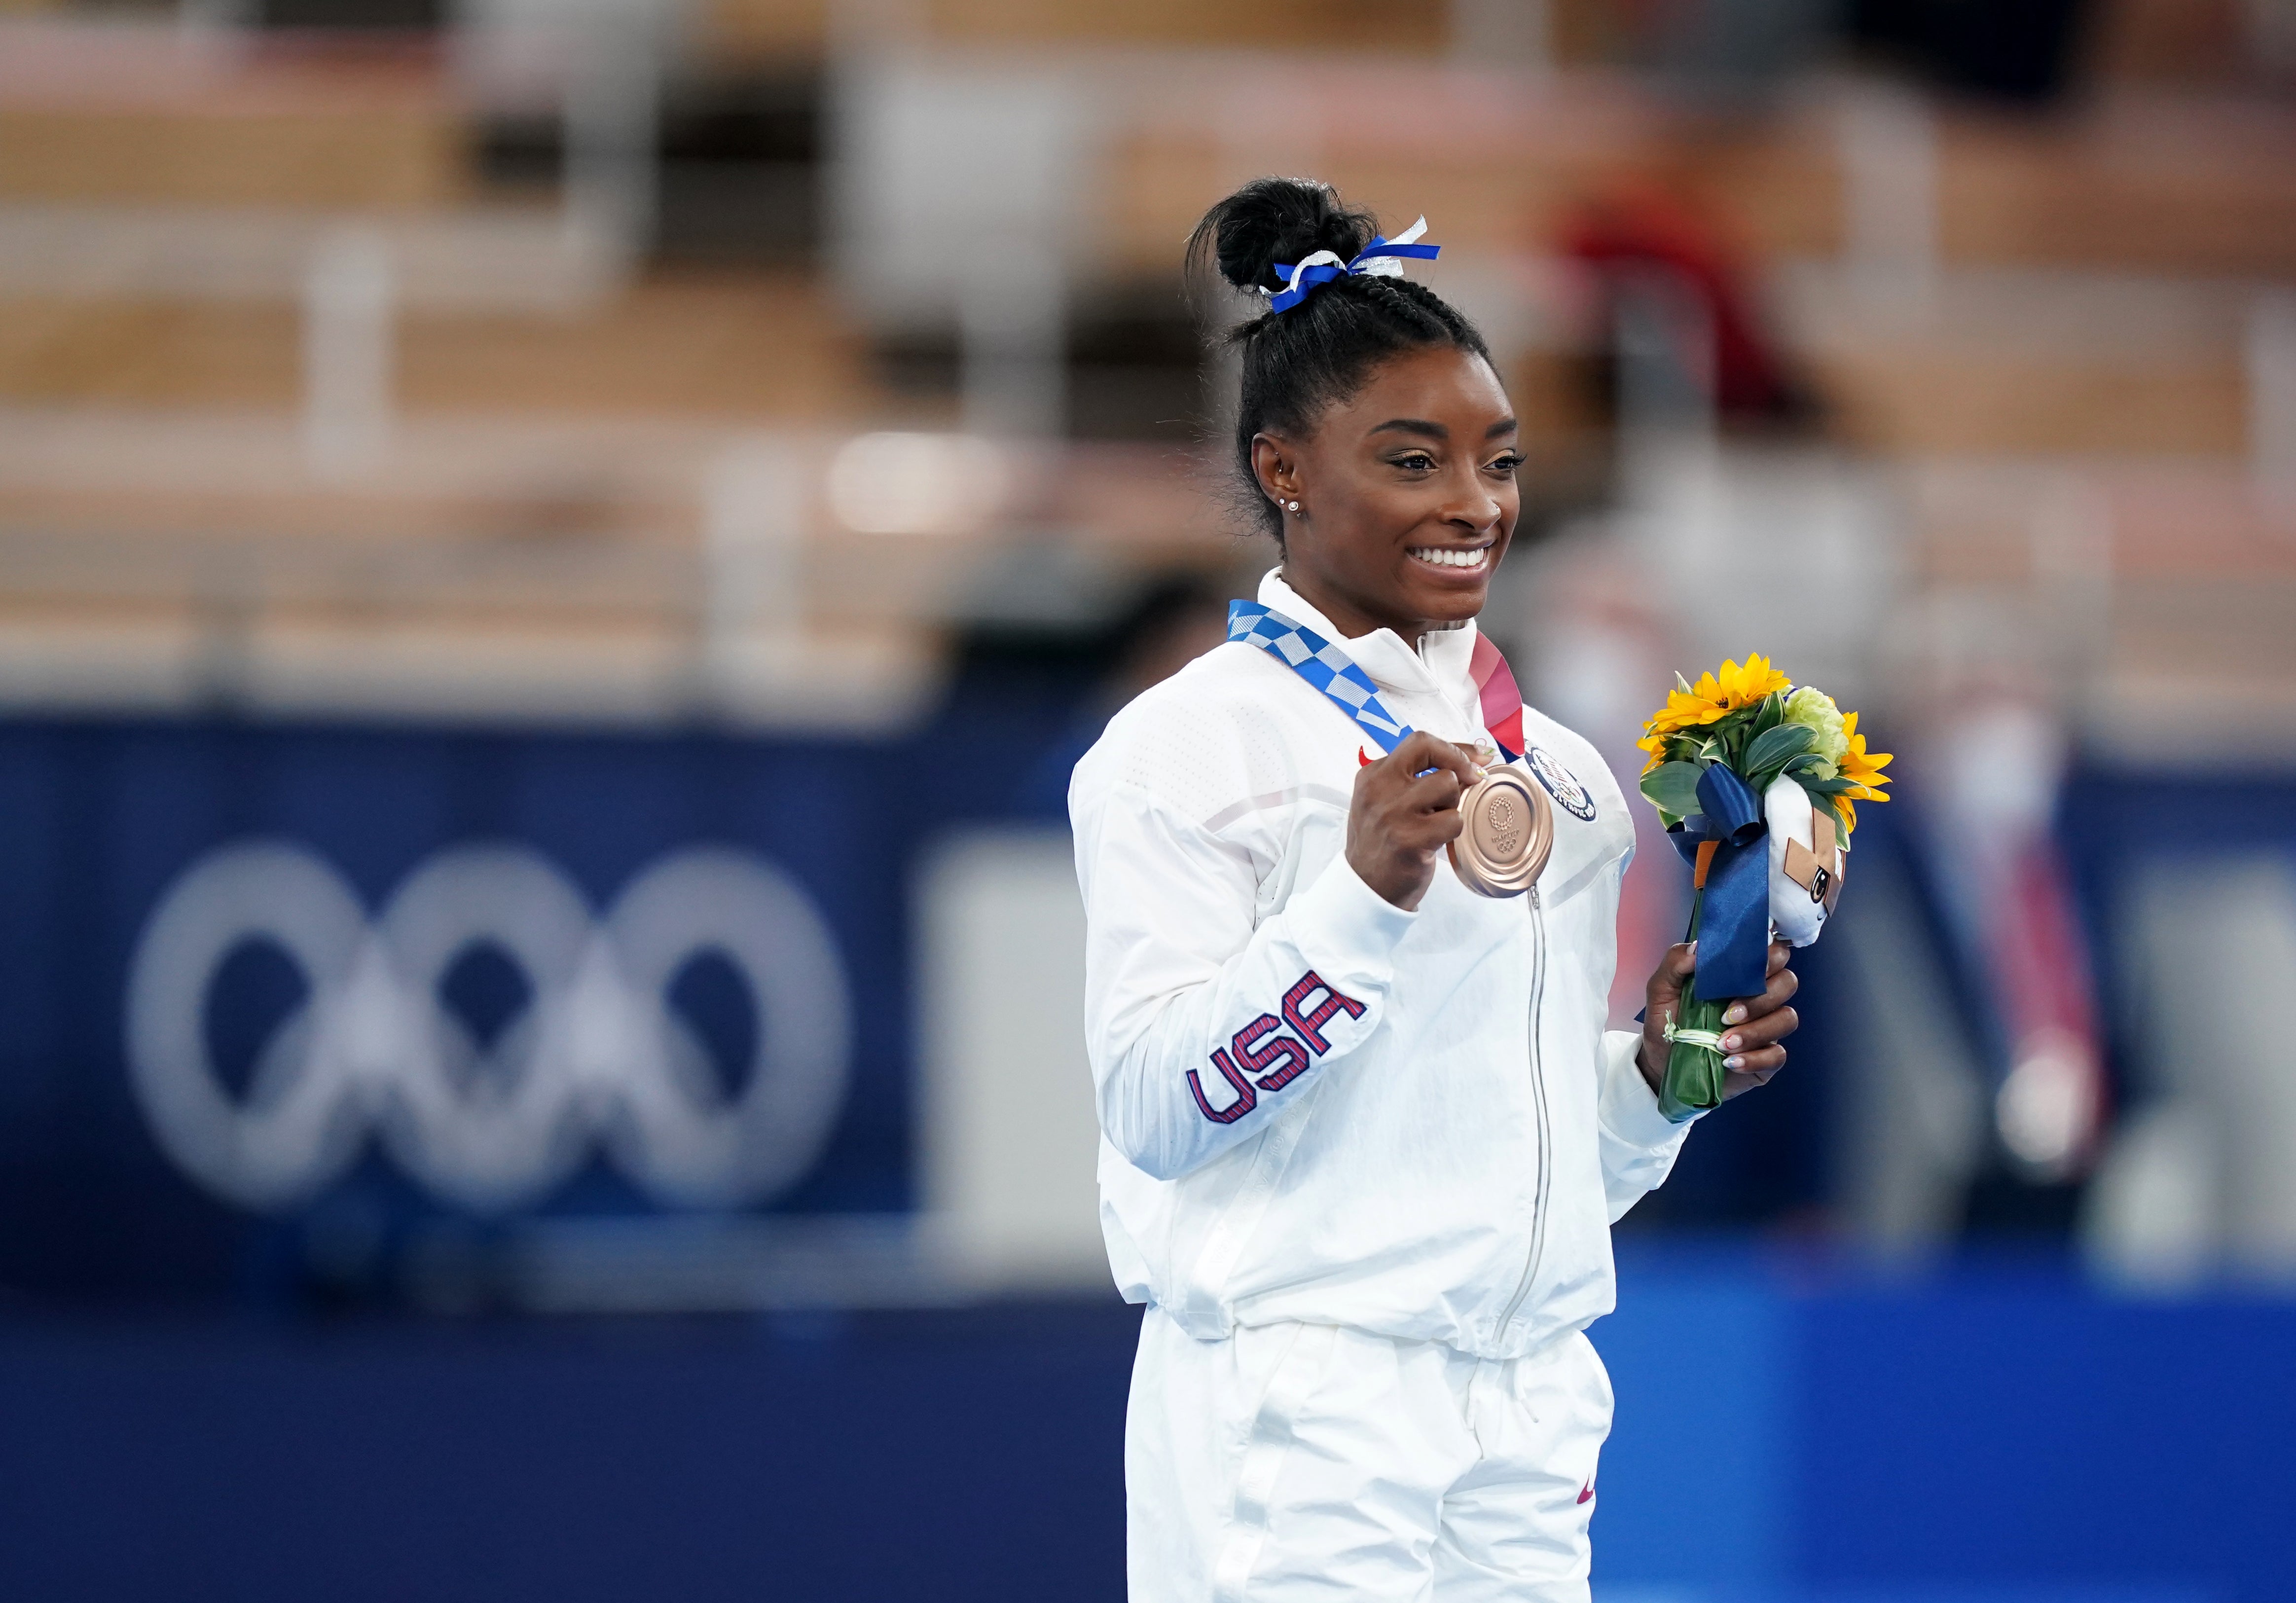 Biles withdrew early in the women’s team final, citing a desire to protect her mental health but returned to finish third in the beam (Mike Egerton/PA)